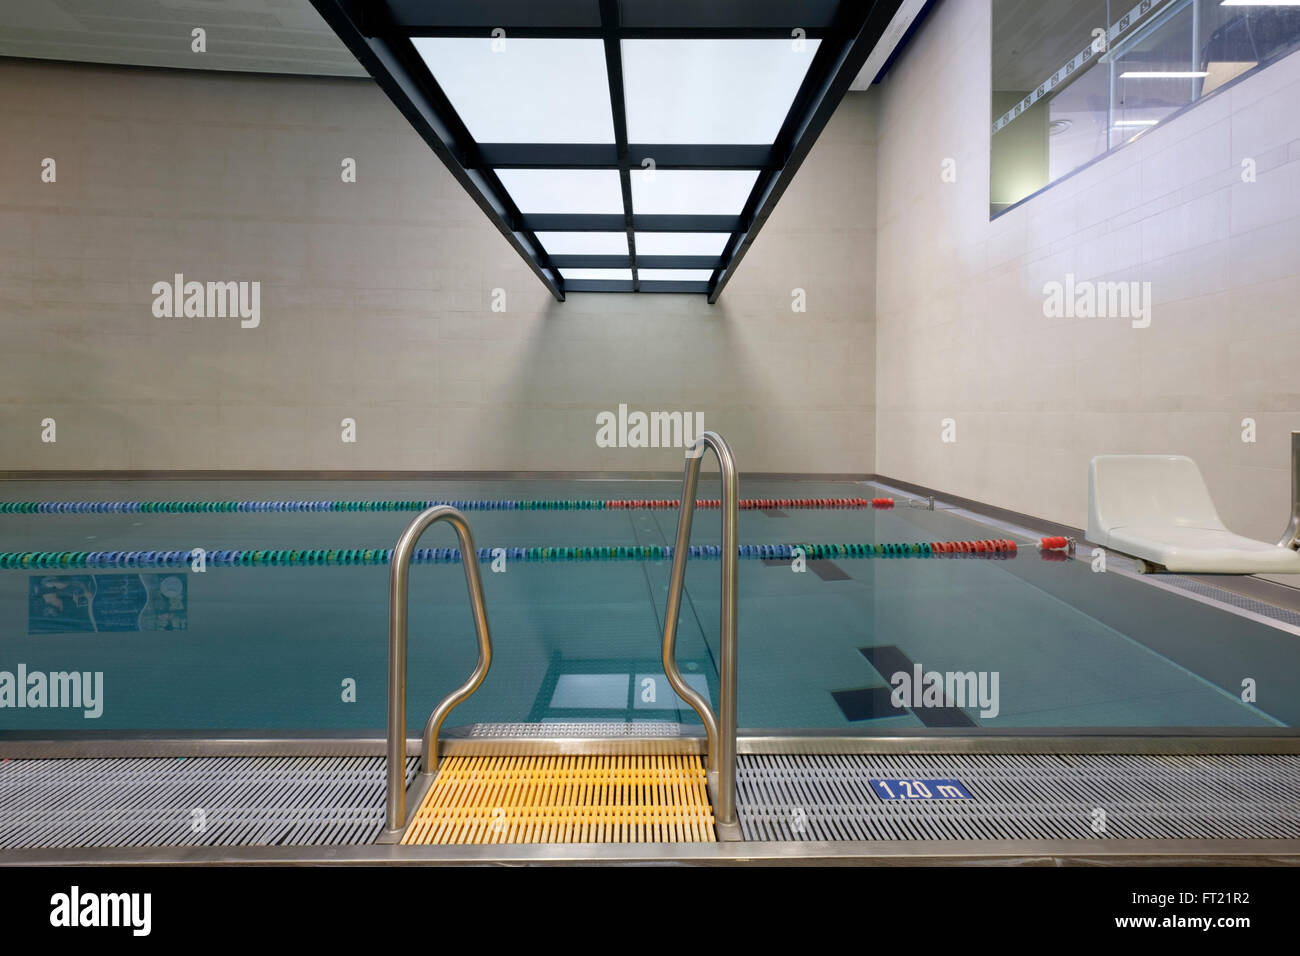 Indoor swimming pool entry ladder Stock Photo